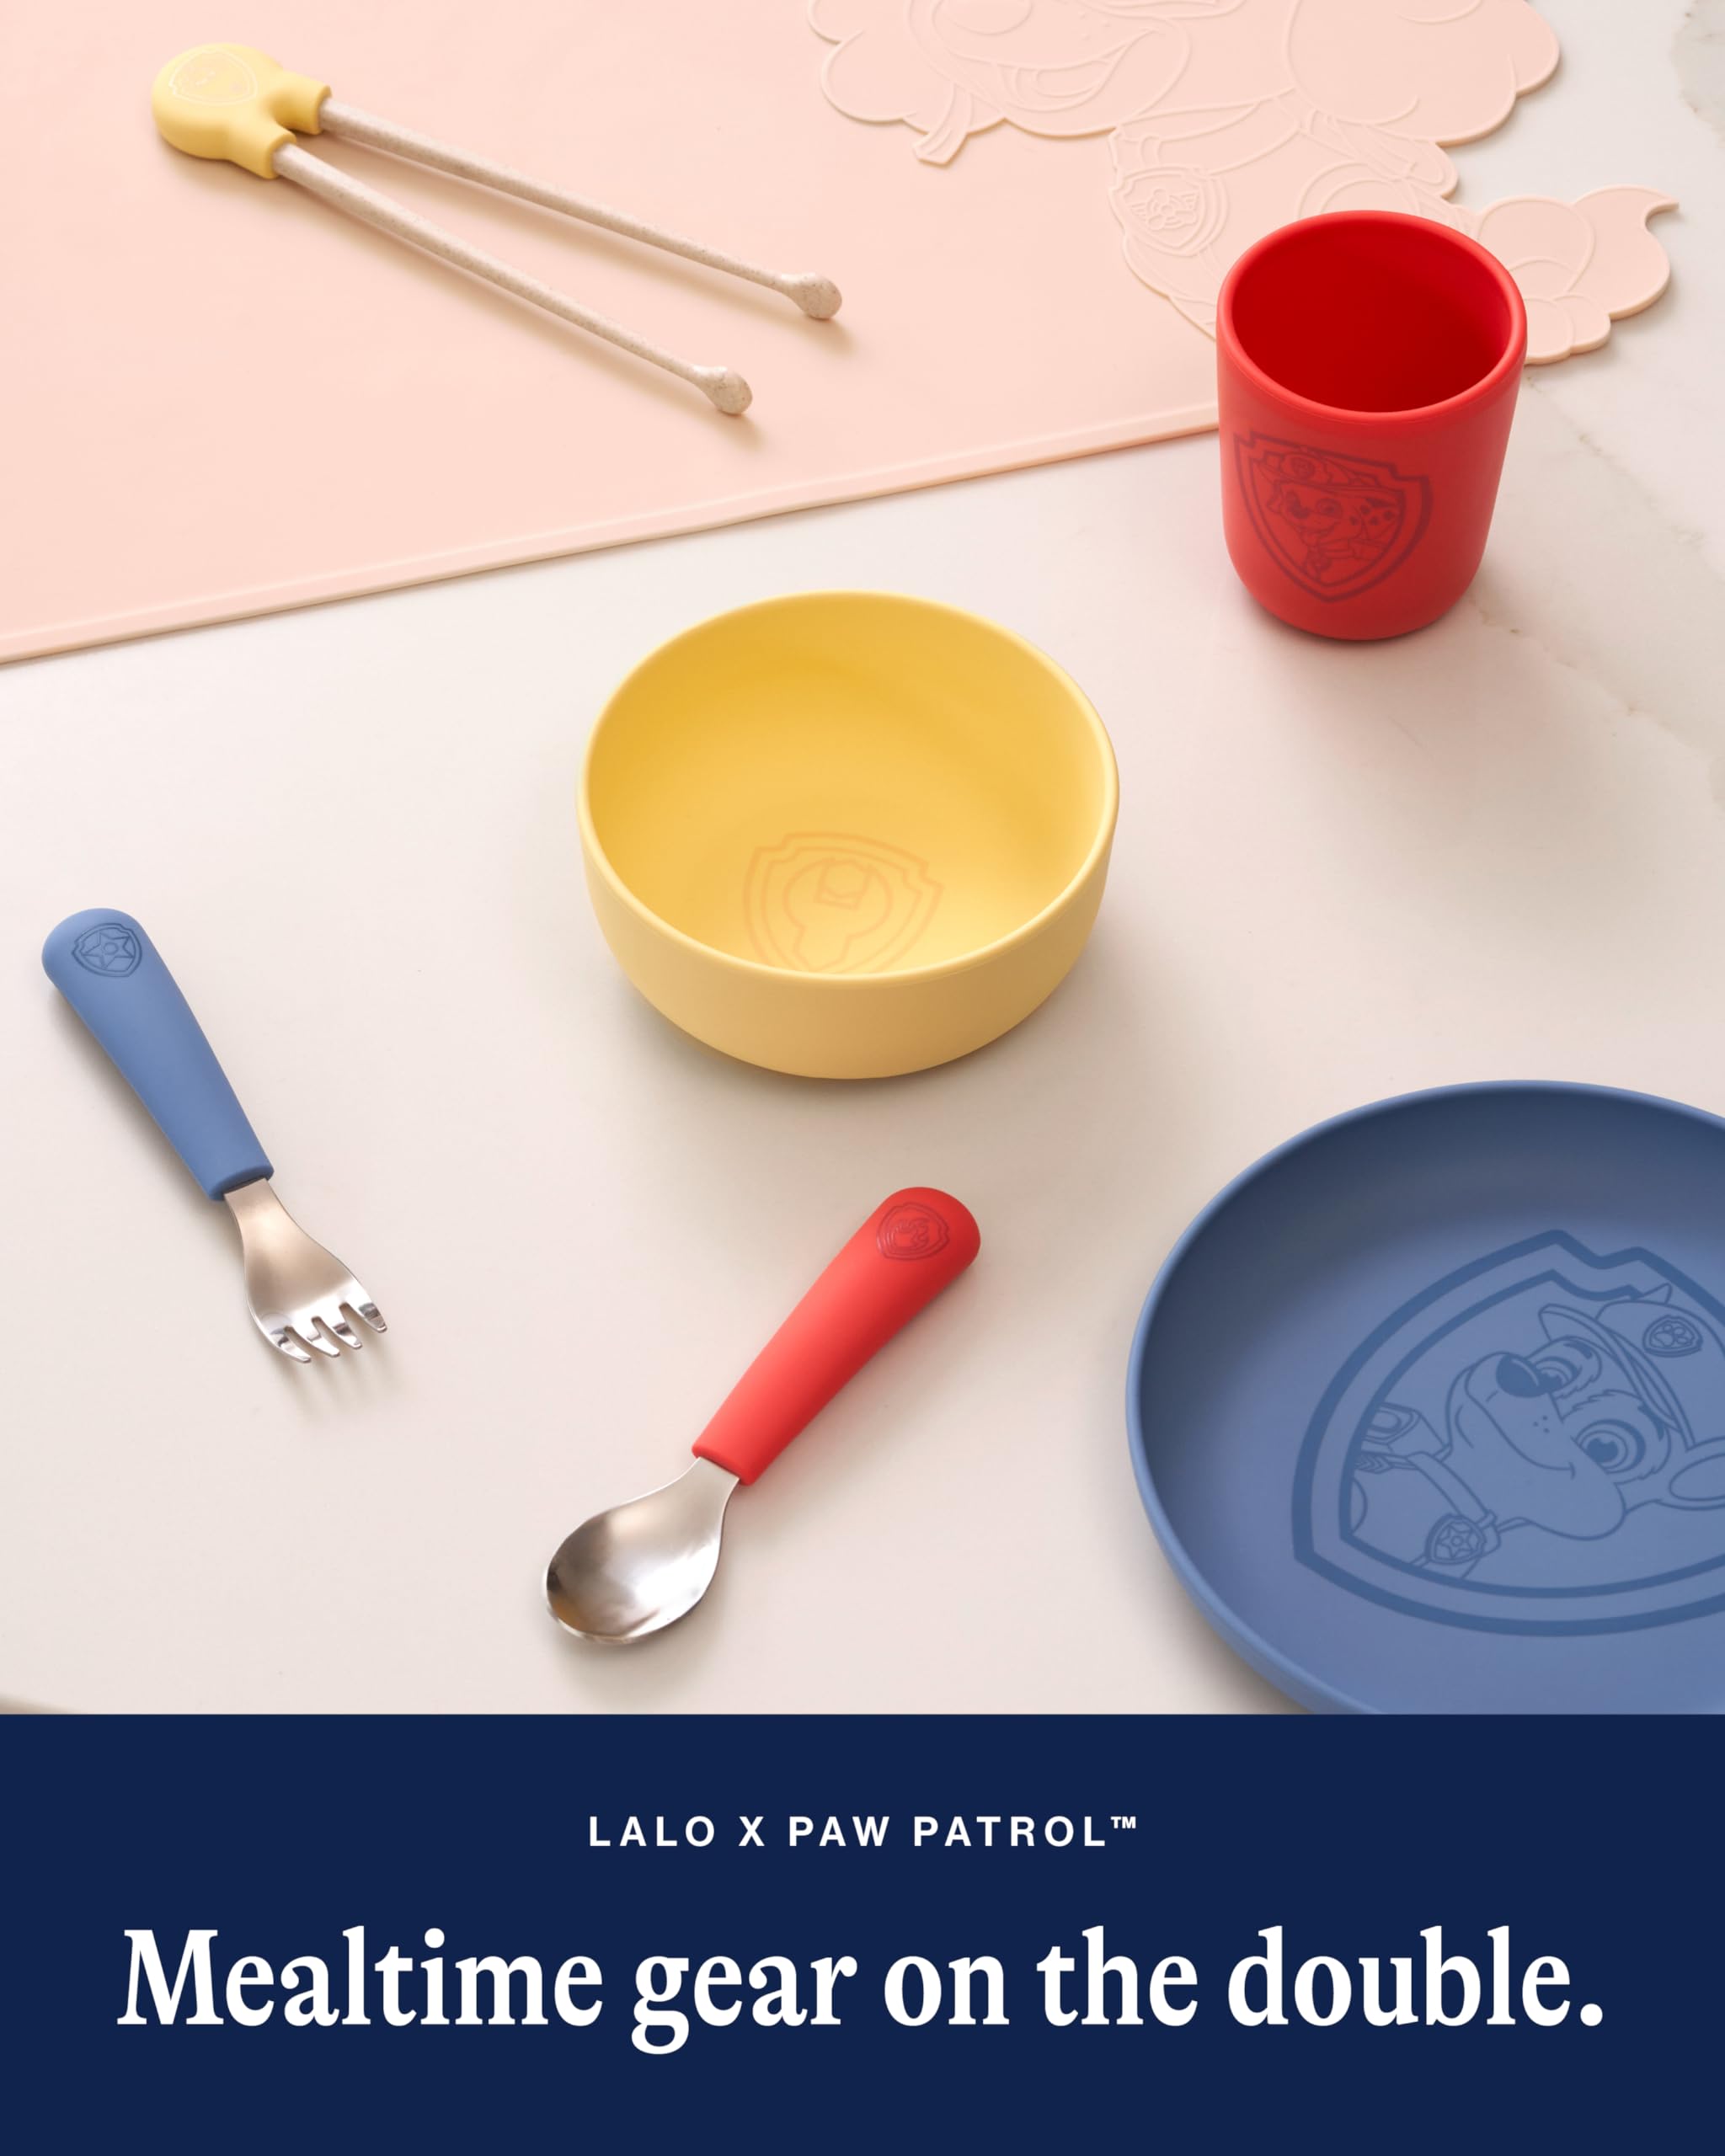 Lalo PAW Patrol Utensils - Toddler Fork and Spoon Set - Stainless Steel and Silicone Ergonomic Toddler Utensils - Children Safe Flatware Set - 2 Pieces - Chase